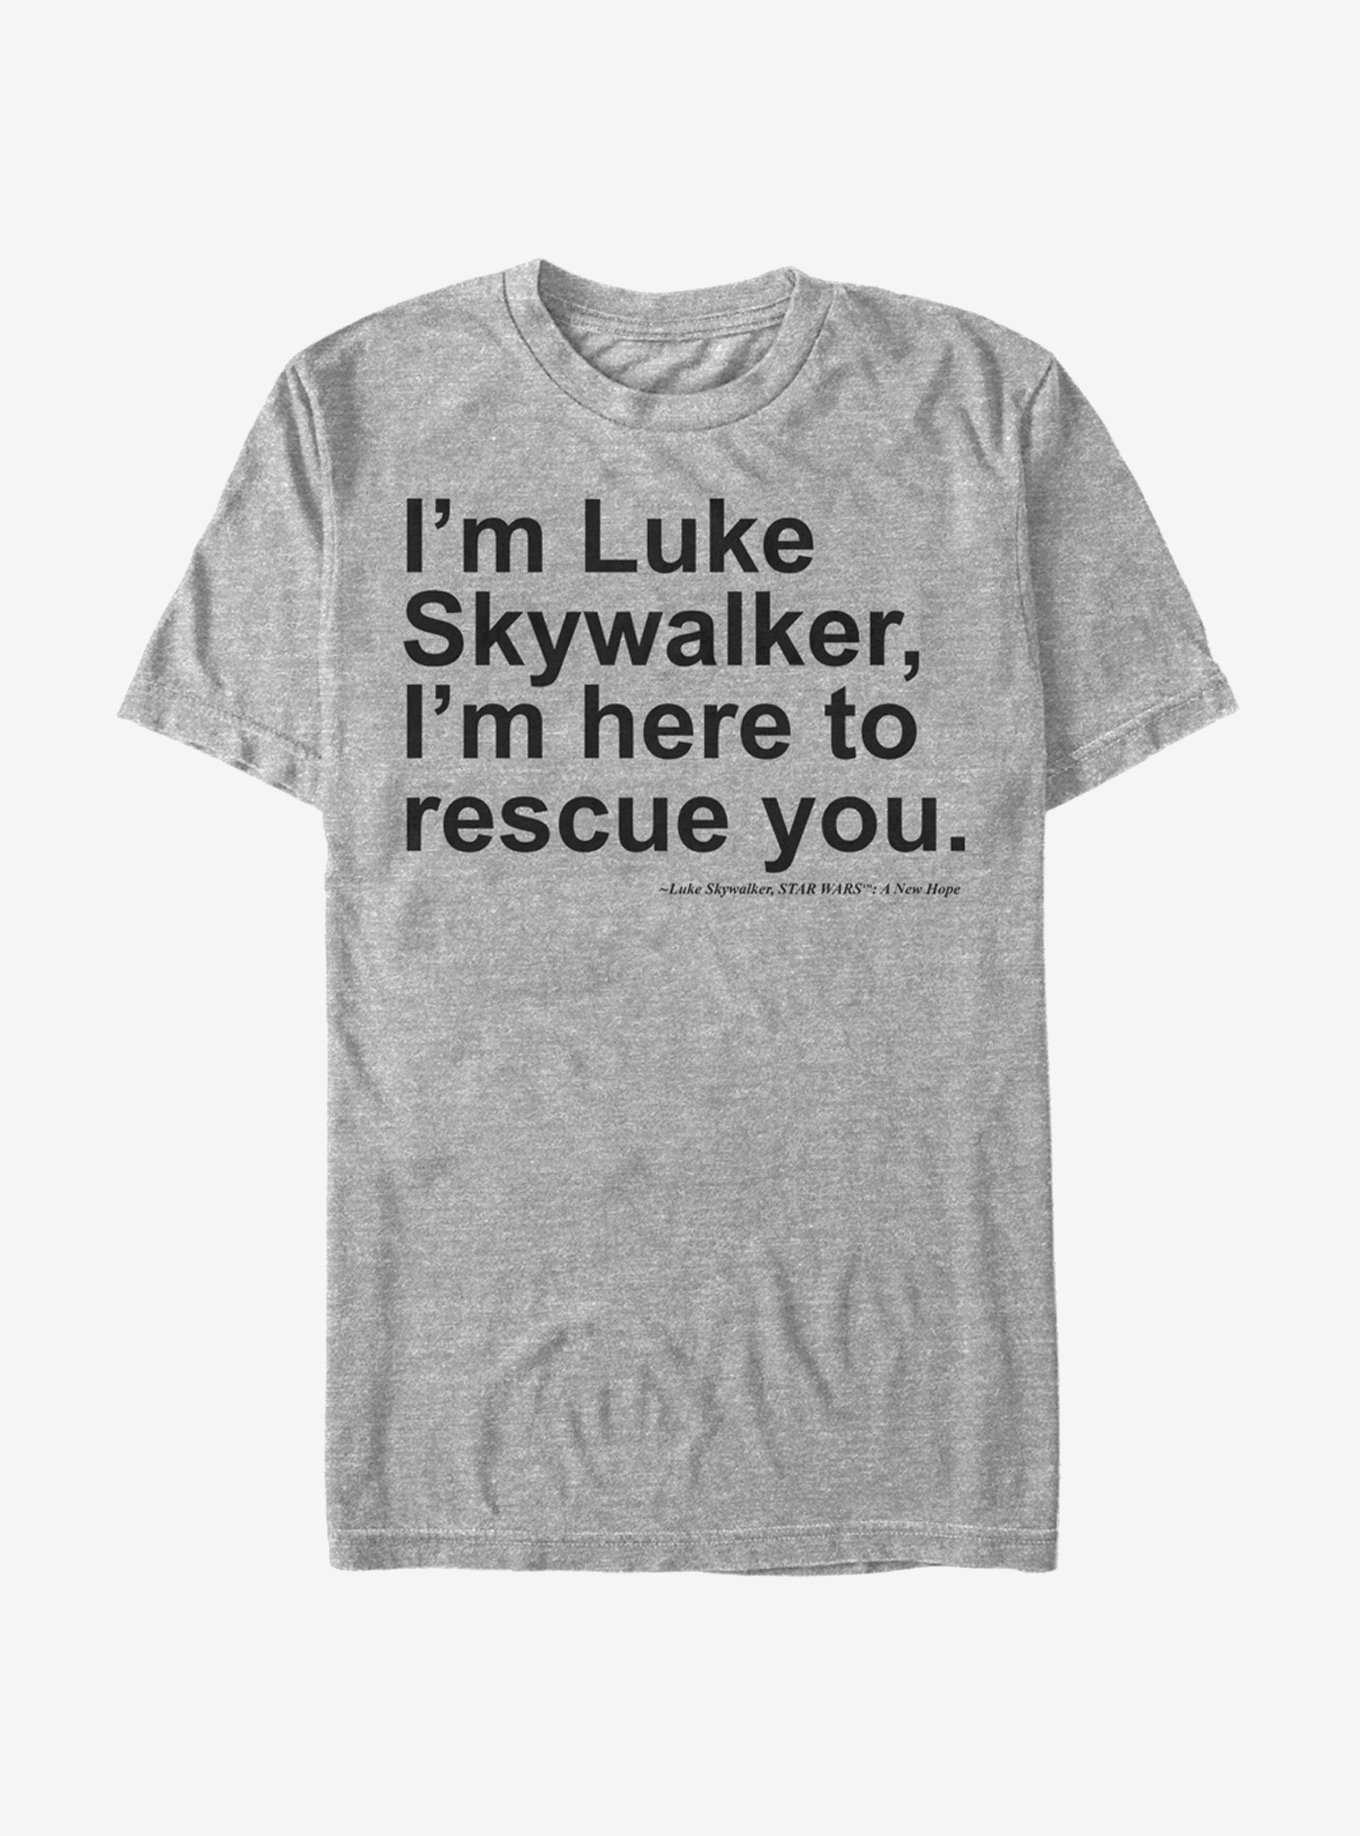 Star Wars Here to Rescue You T-Shirt, , hi-res